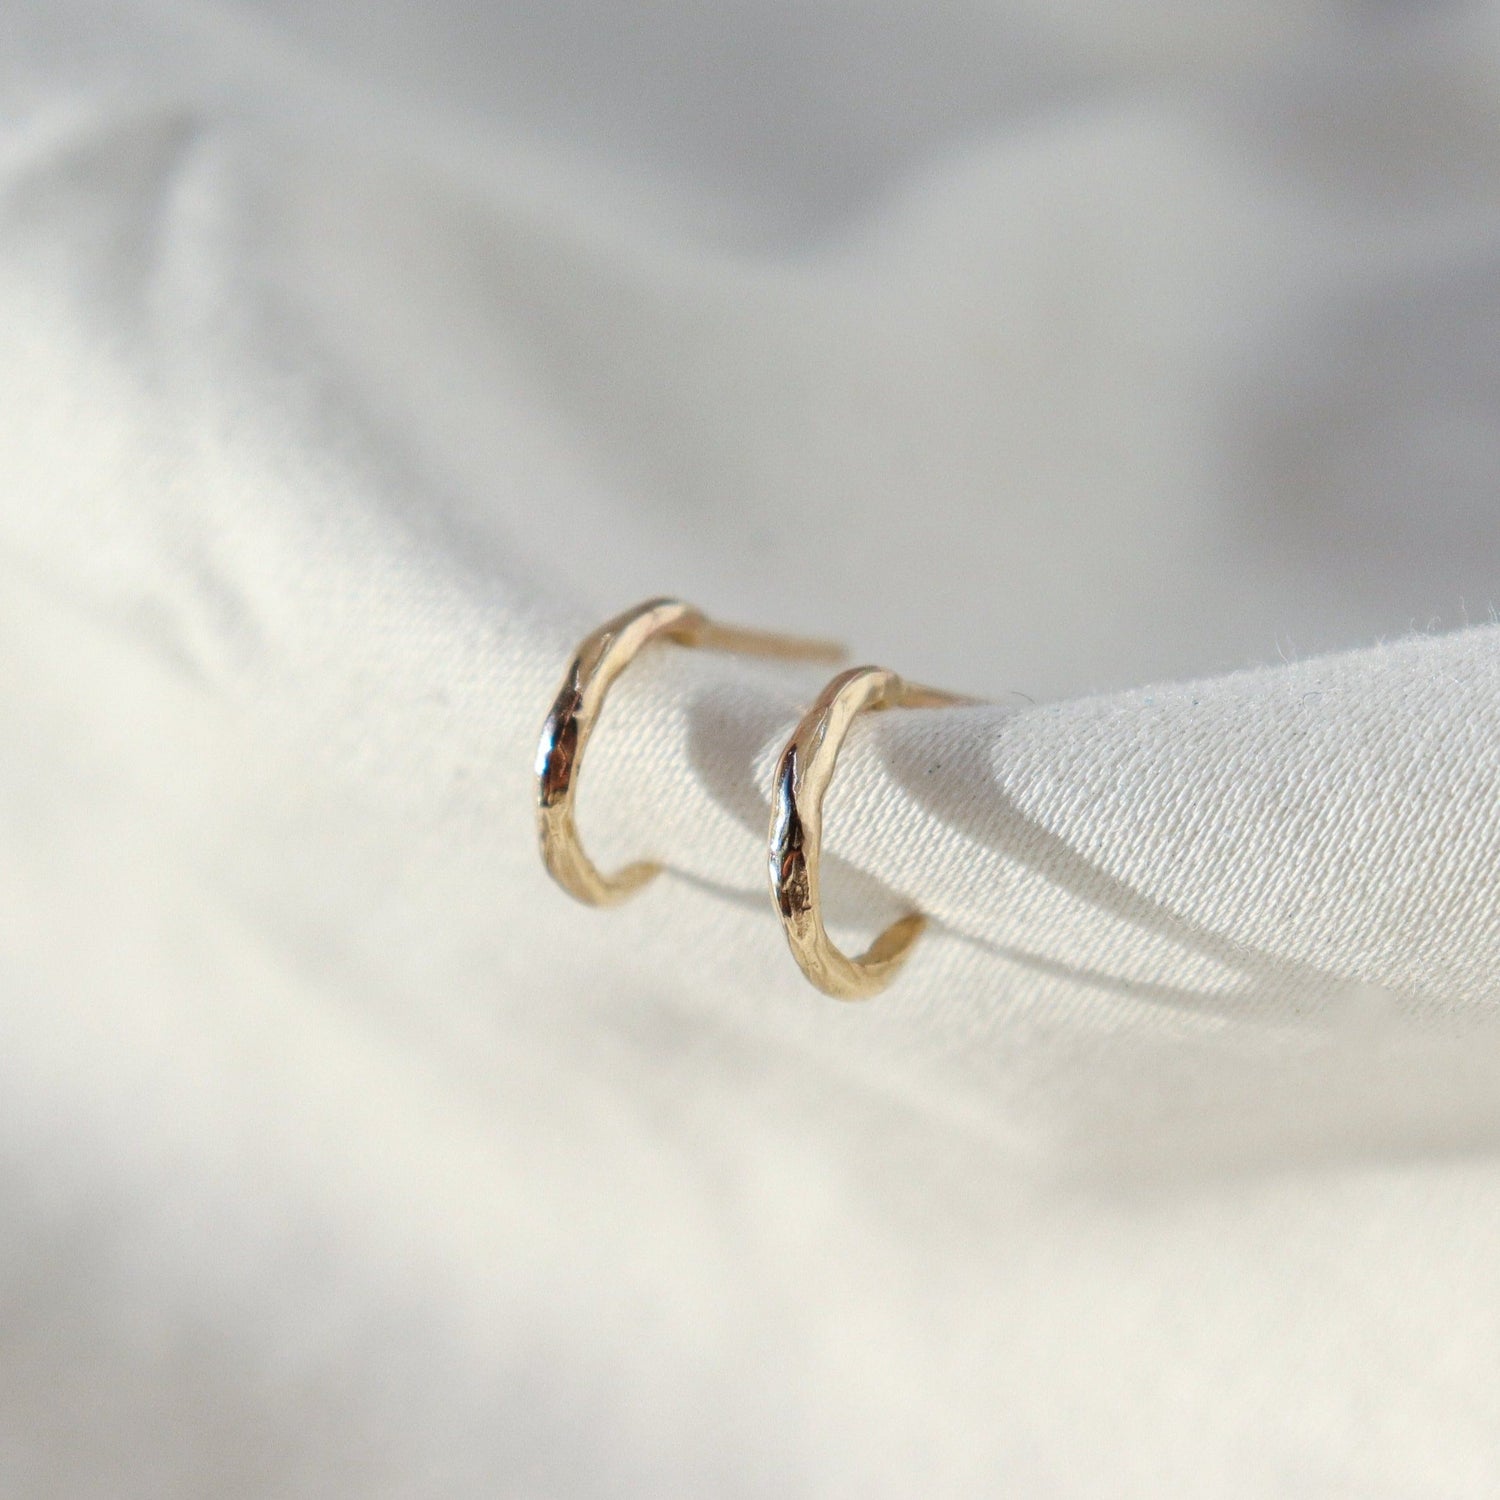 A pair of classic huggie hoops positioned on white fabric